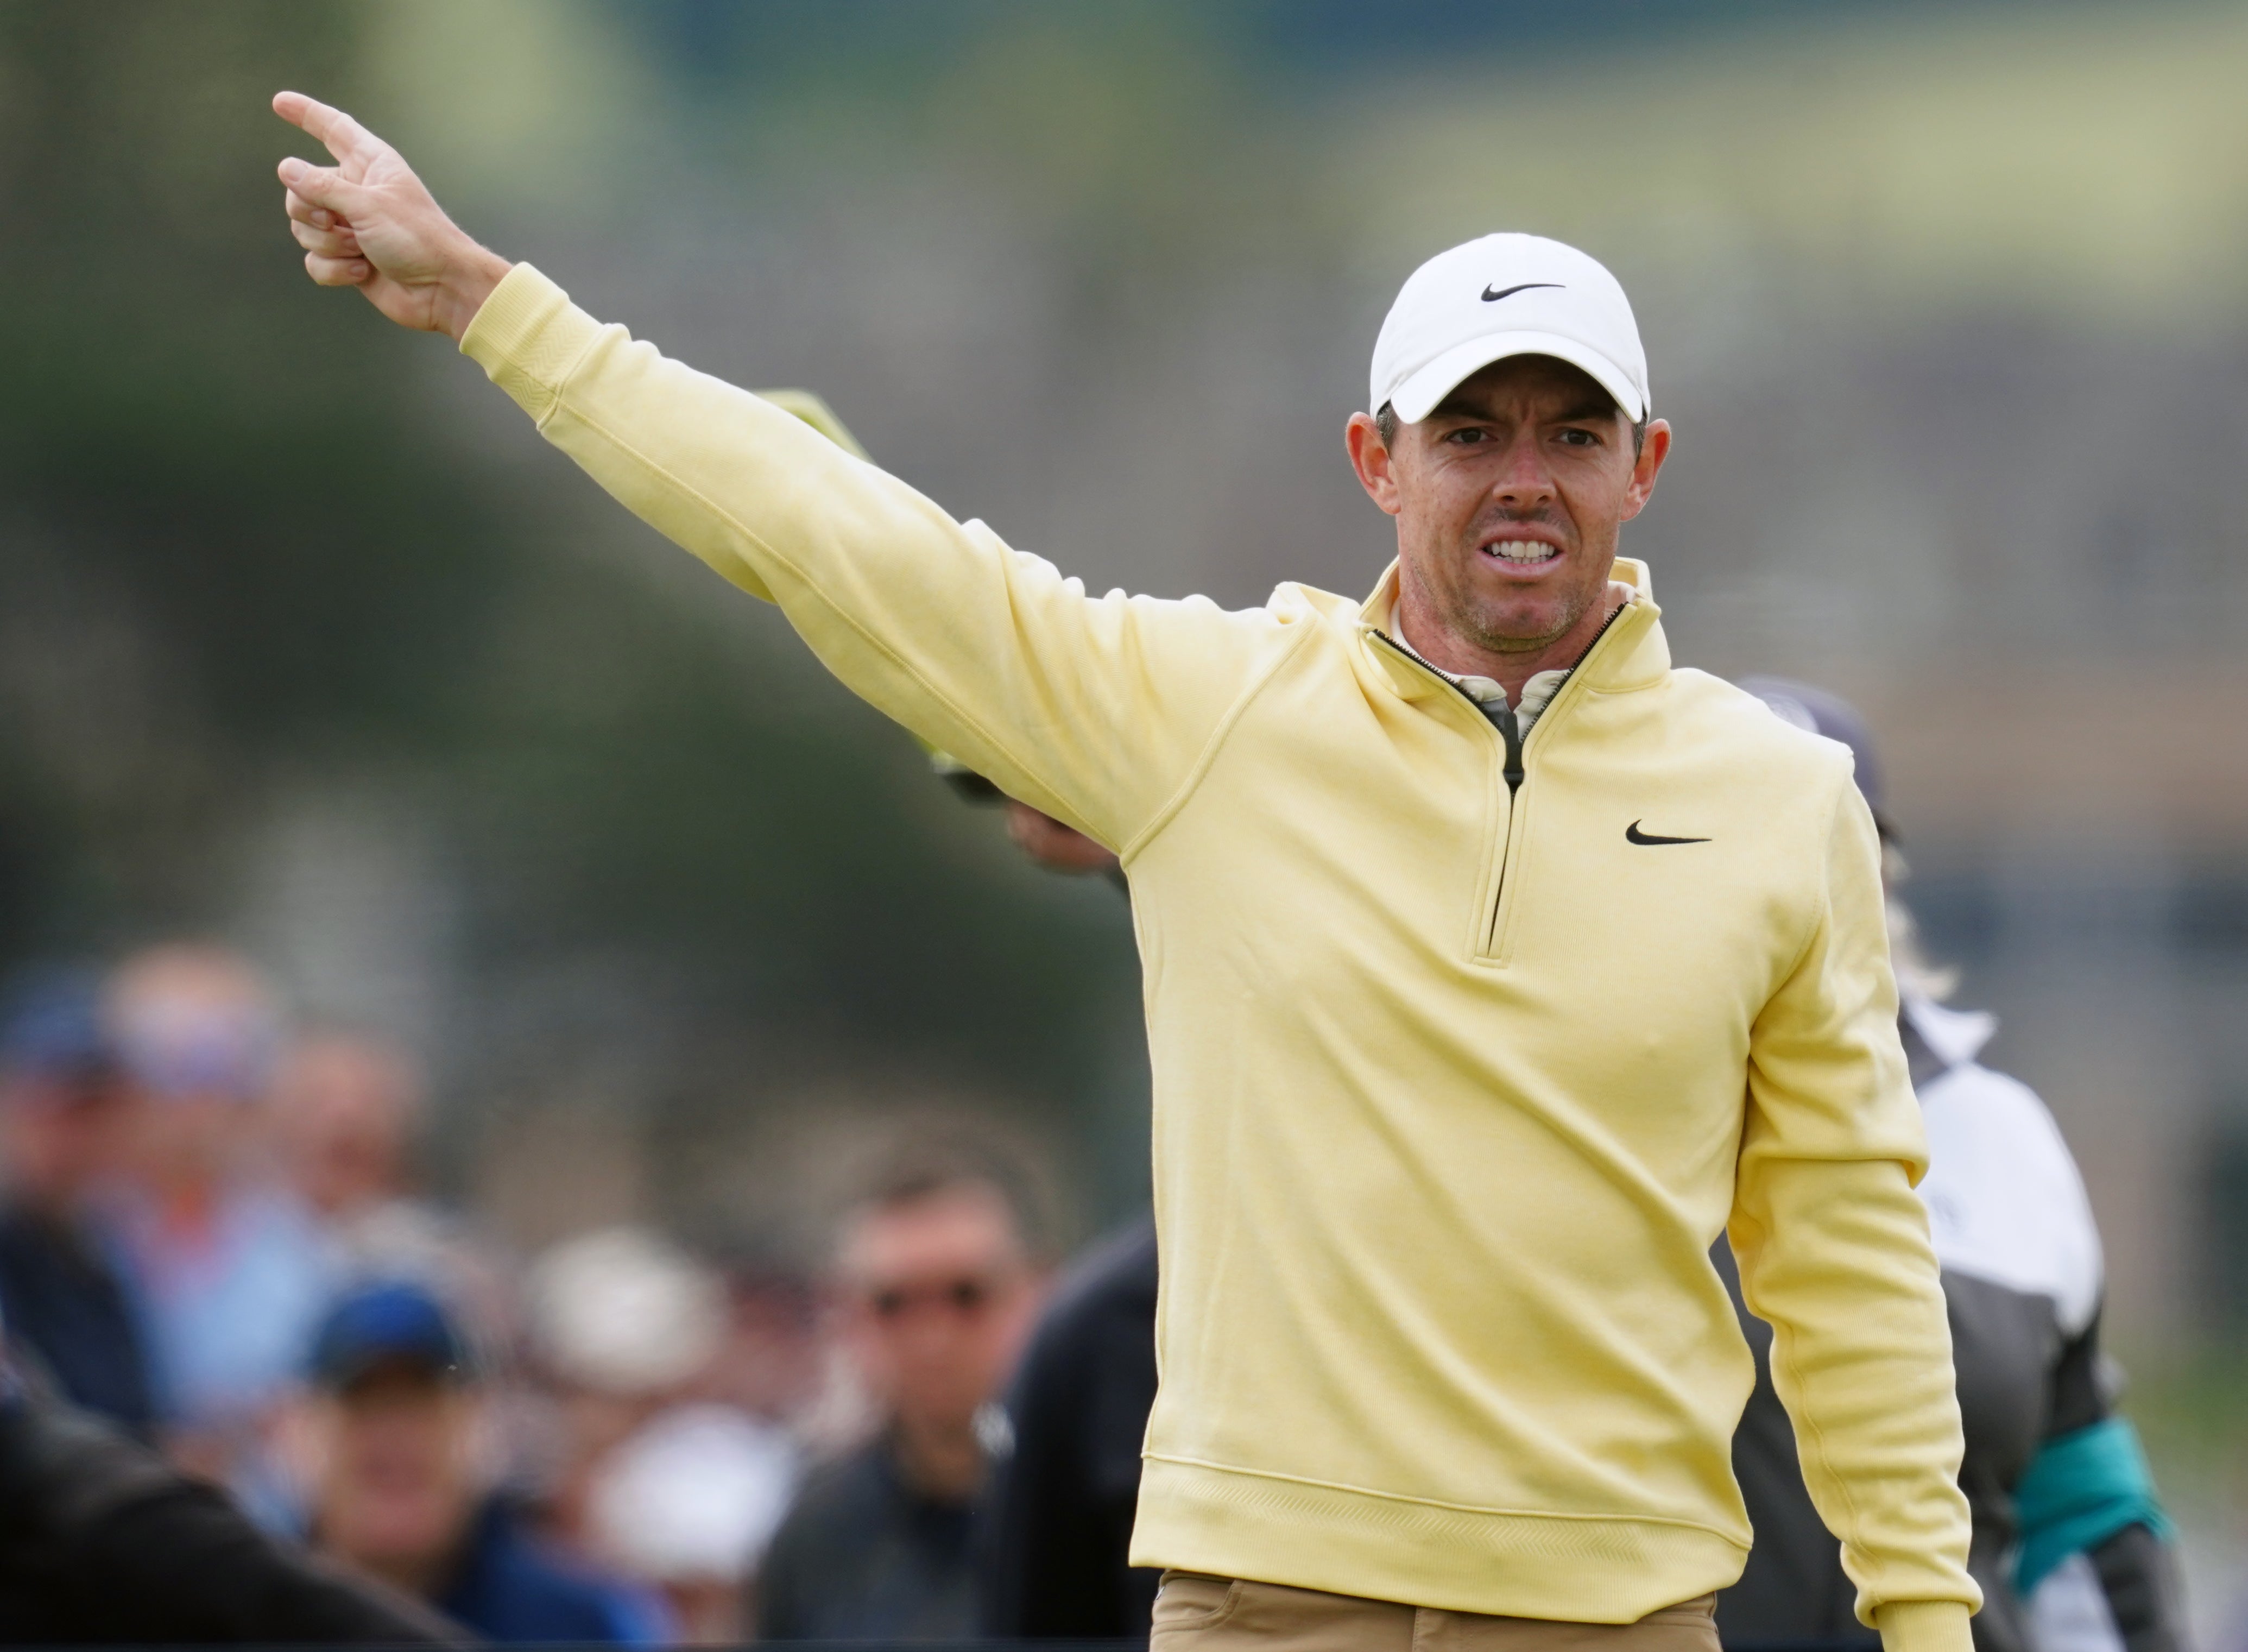 ‘A fantastic start’: Rory McIlroy hoping to build on strong opening day ...